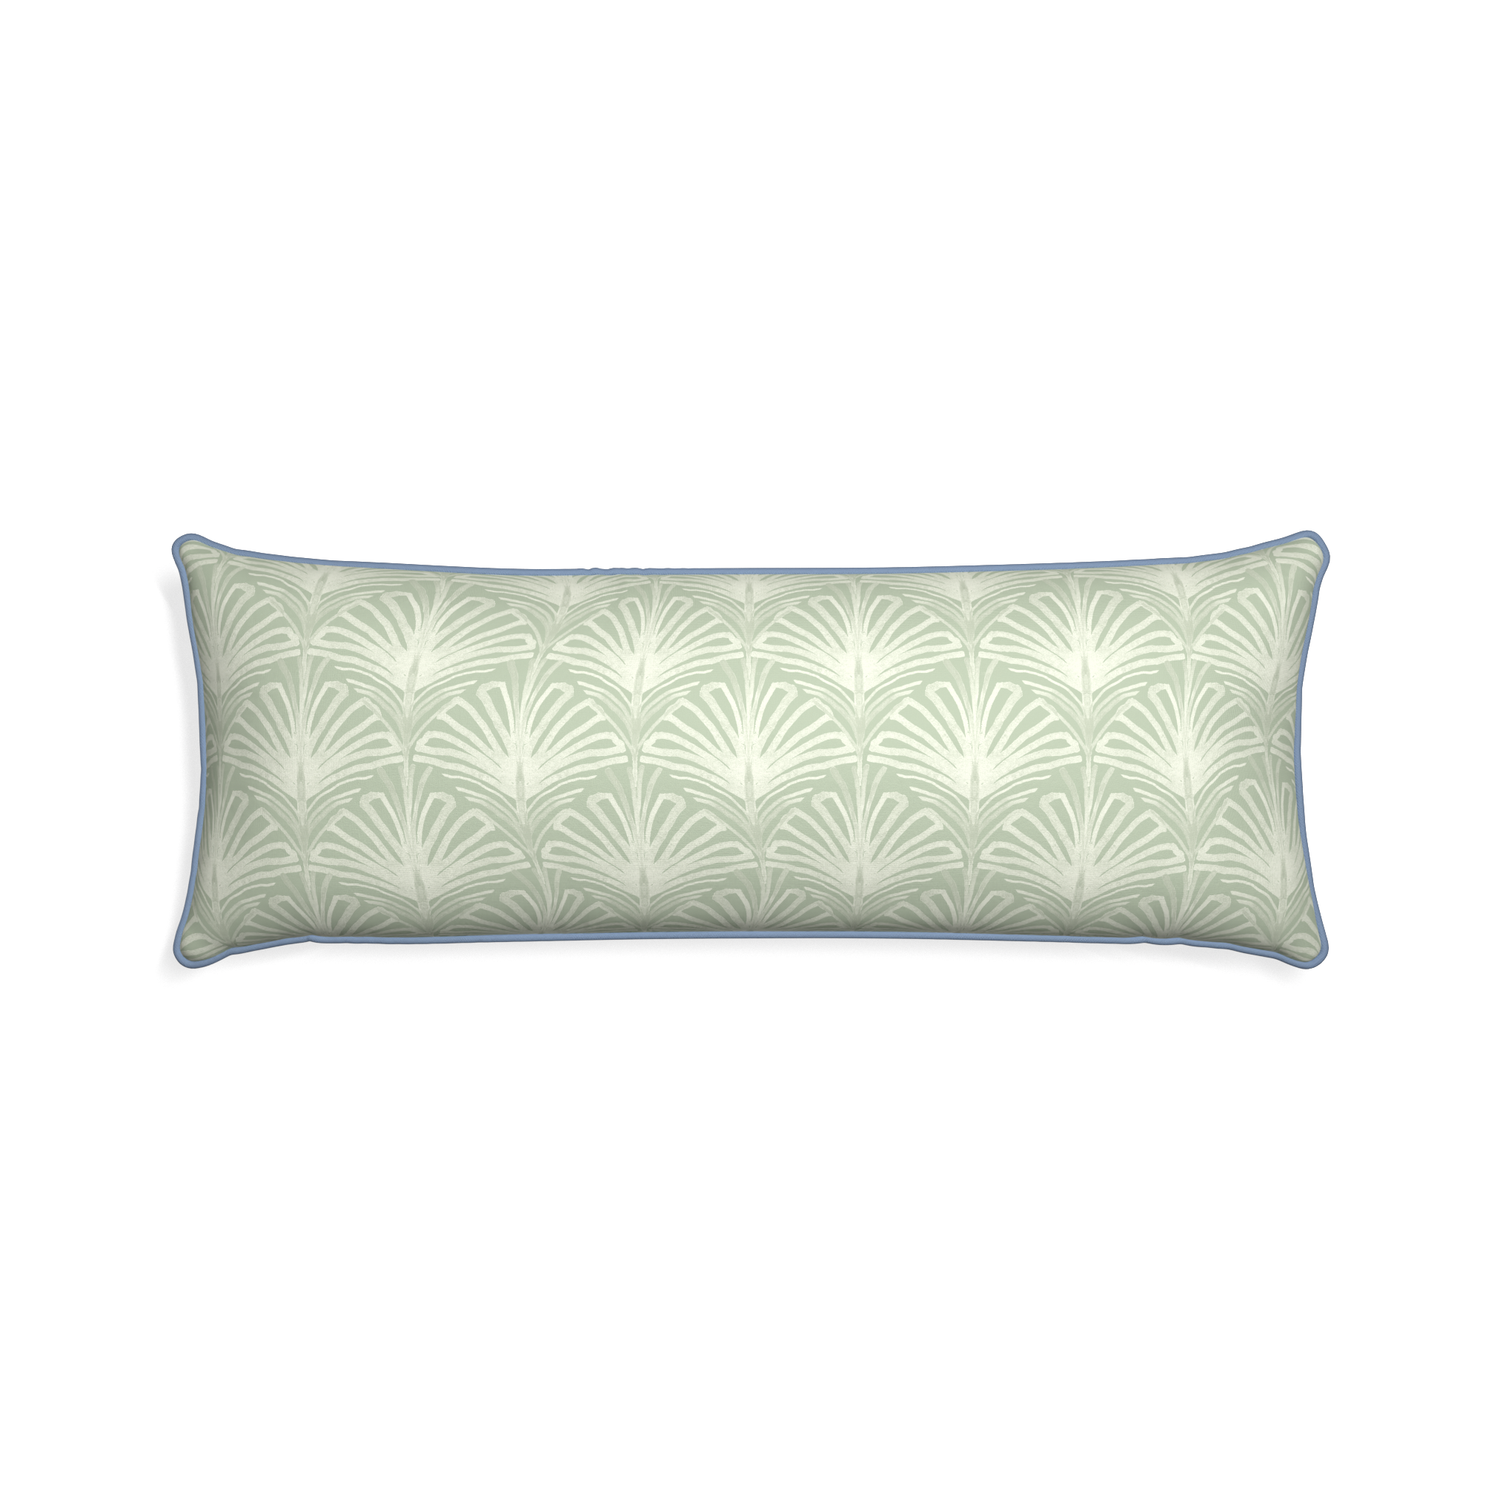 Xl-lumbar suzy sage custom pillow with sky piping on white background